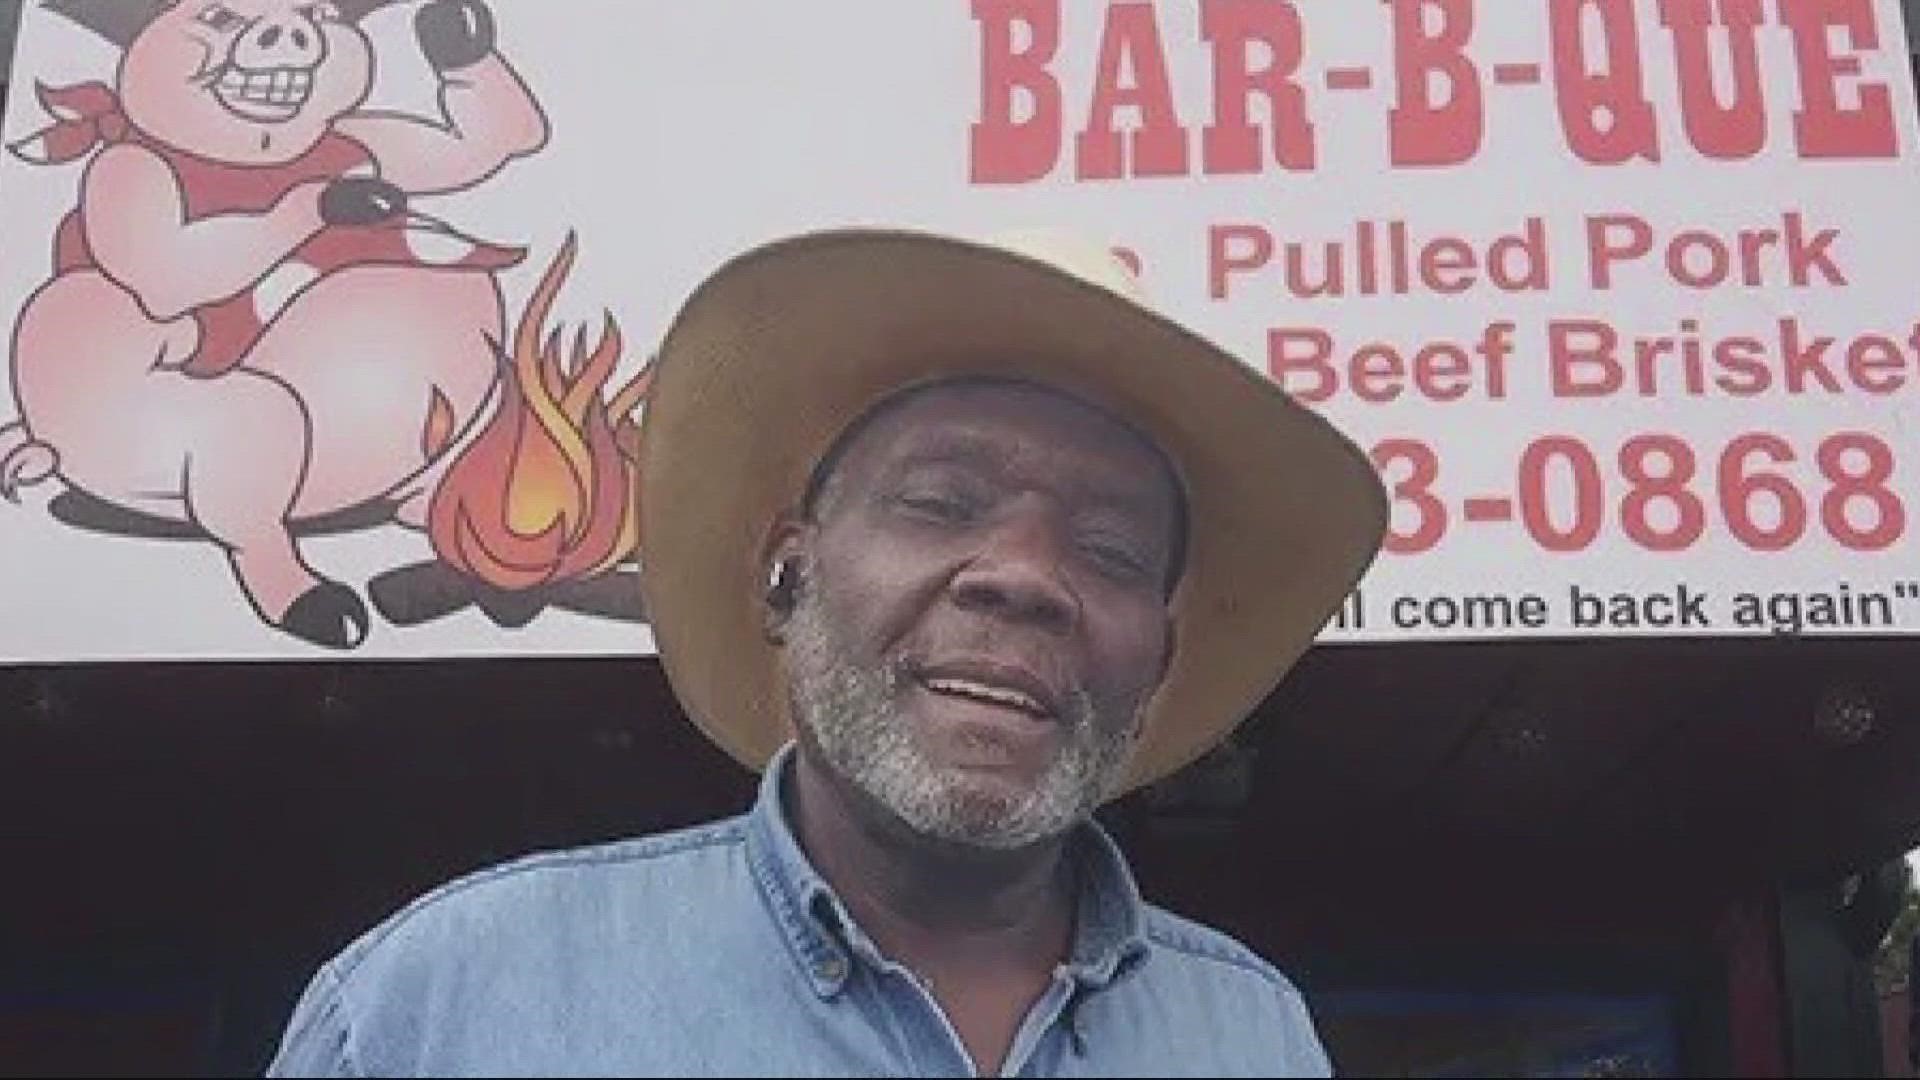 James Dixon is the owner of Dixon's Rib Pit in Northeast Portland. Just over a week ago, his meat smoker — essentially his main source of income — was stolen.